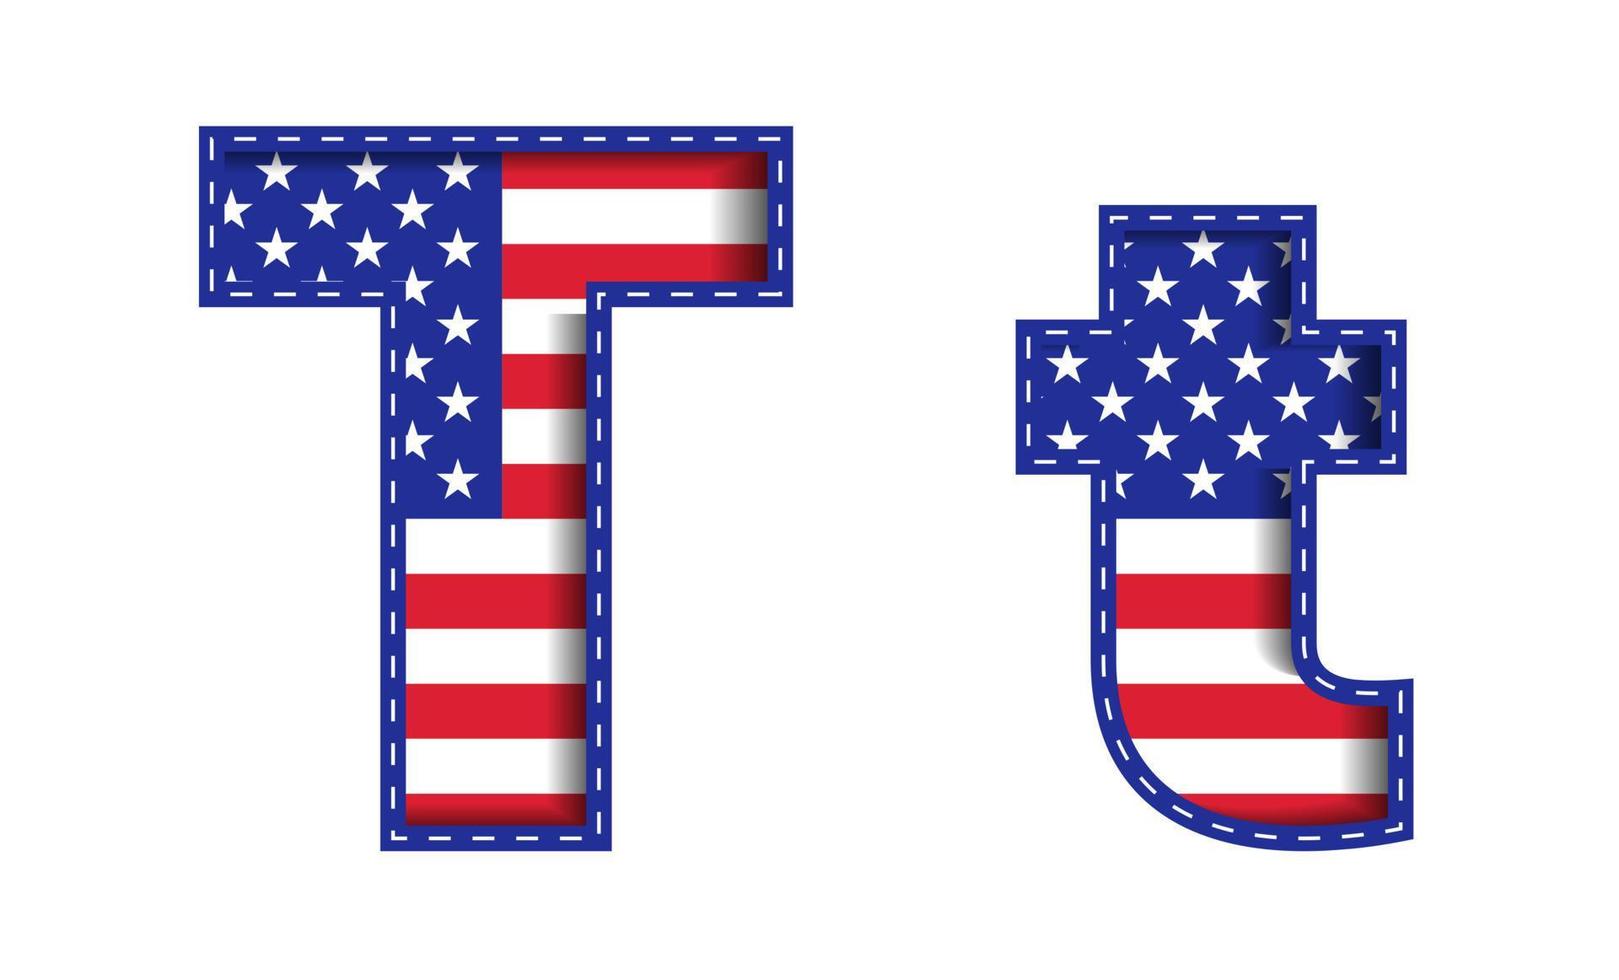 T Alphabet Capital Small Letter USA Independence Memorial Day United States of America Character Font Blue Navy Red Star Stripes  National Flag White Background 3D Paper Cutout  Vector Illustration